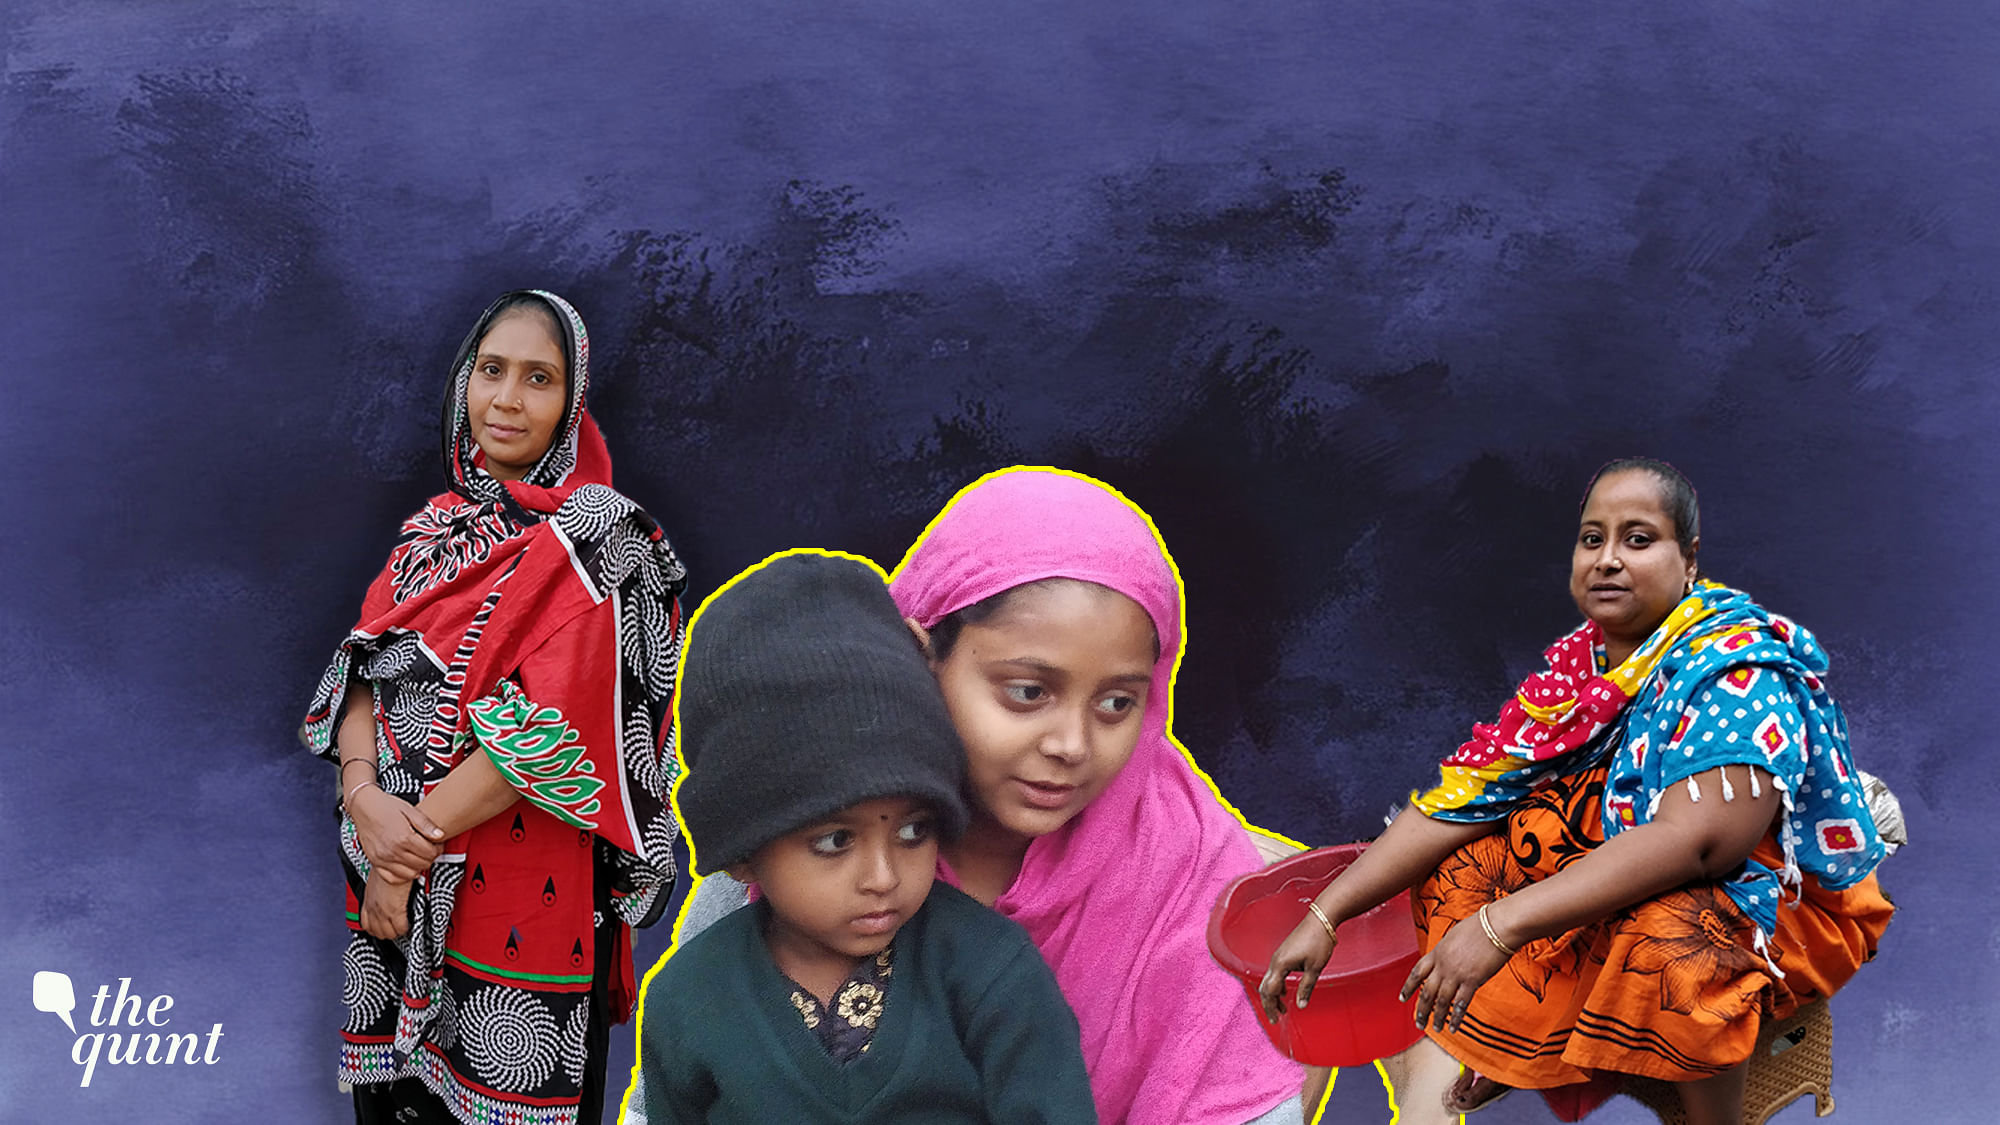 <b>The Quint</b> travelled to rural and urban settlements in Bengal to find out what women think about the <i>triple talaq</i> judgment, Ishrat Jahan’s move to the BJP, and the politics around their identity.